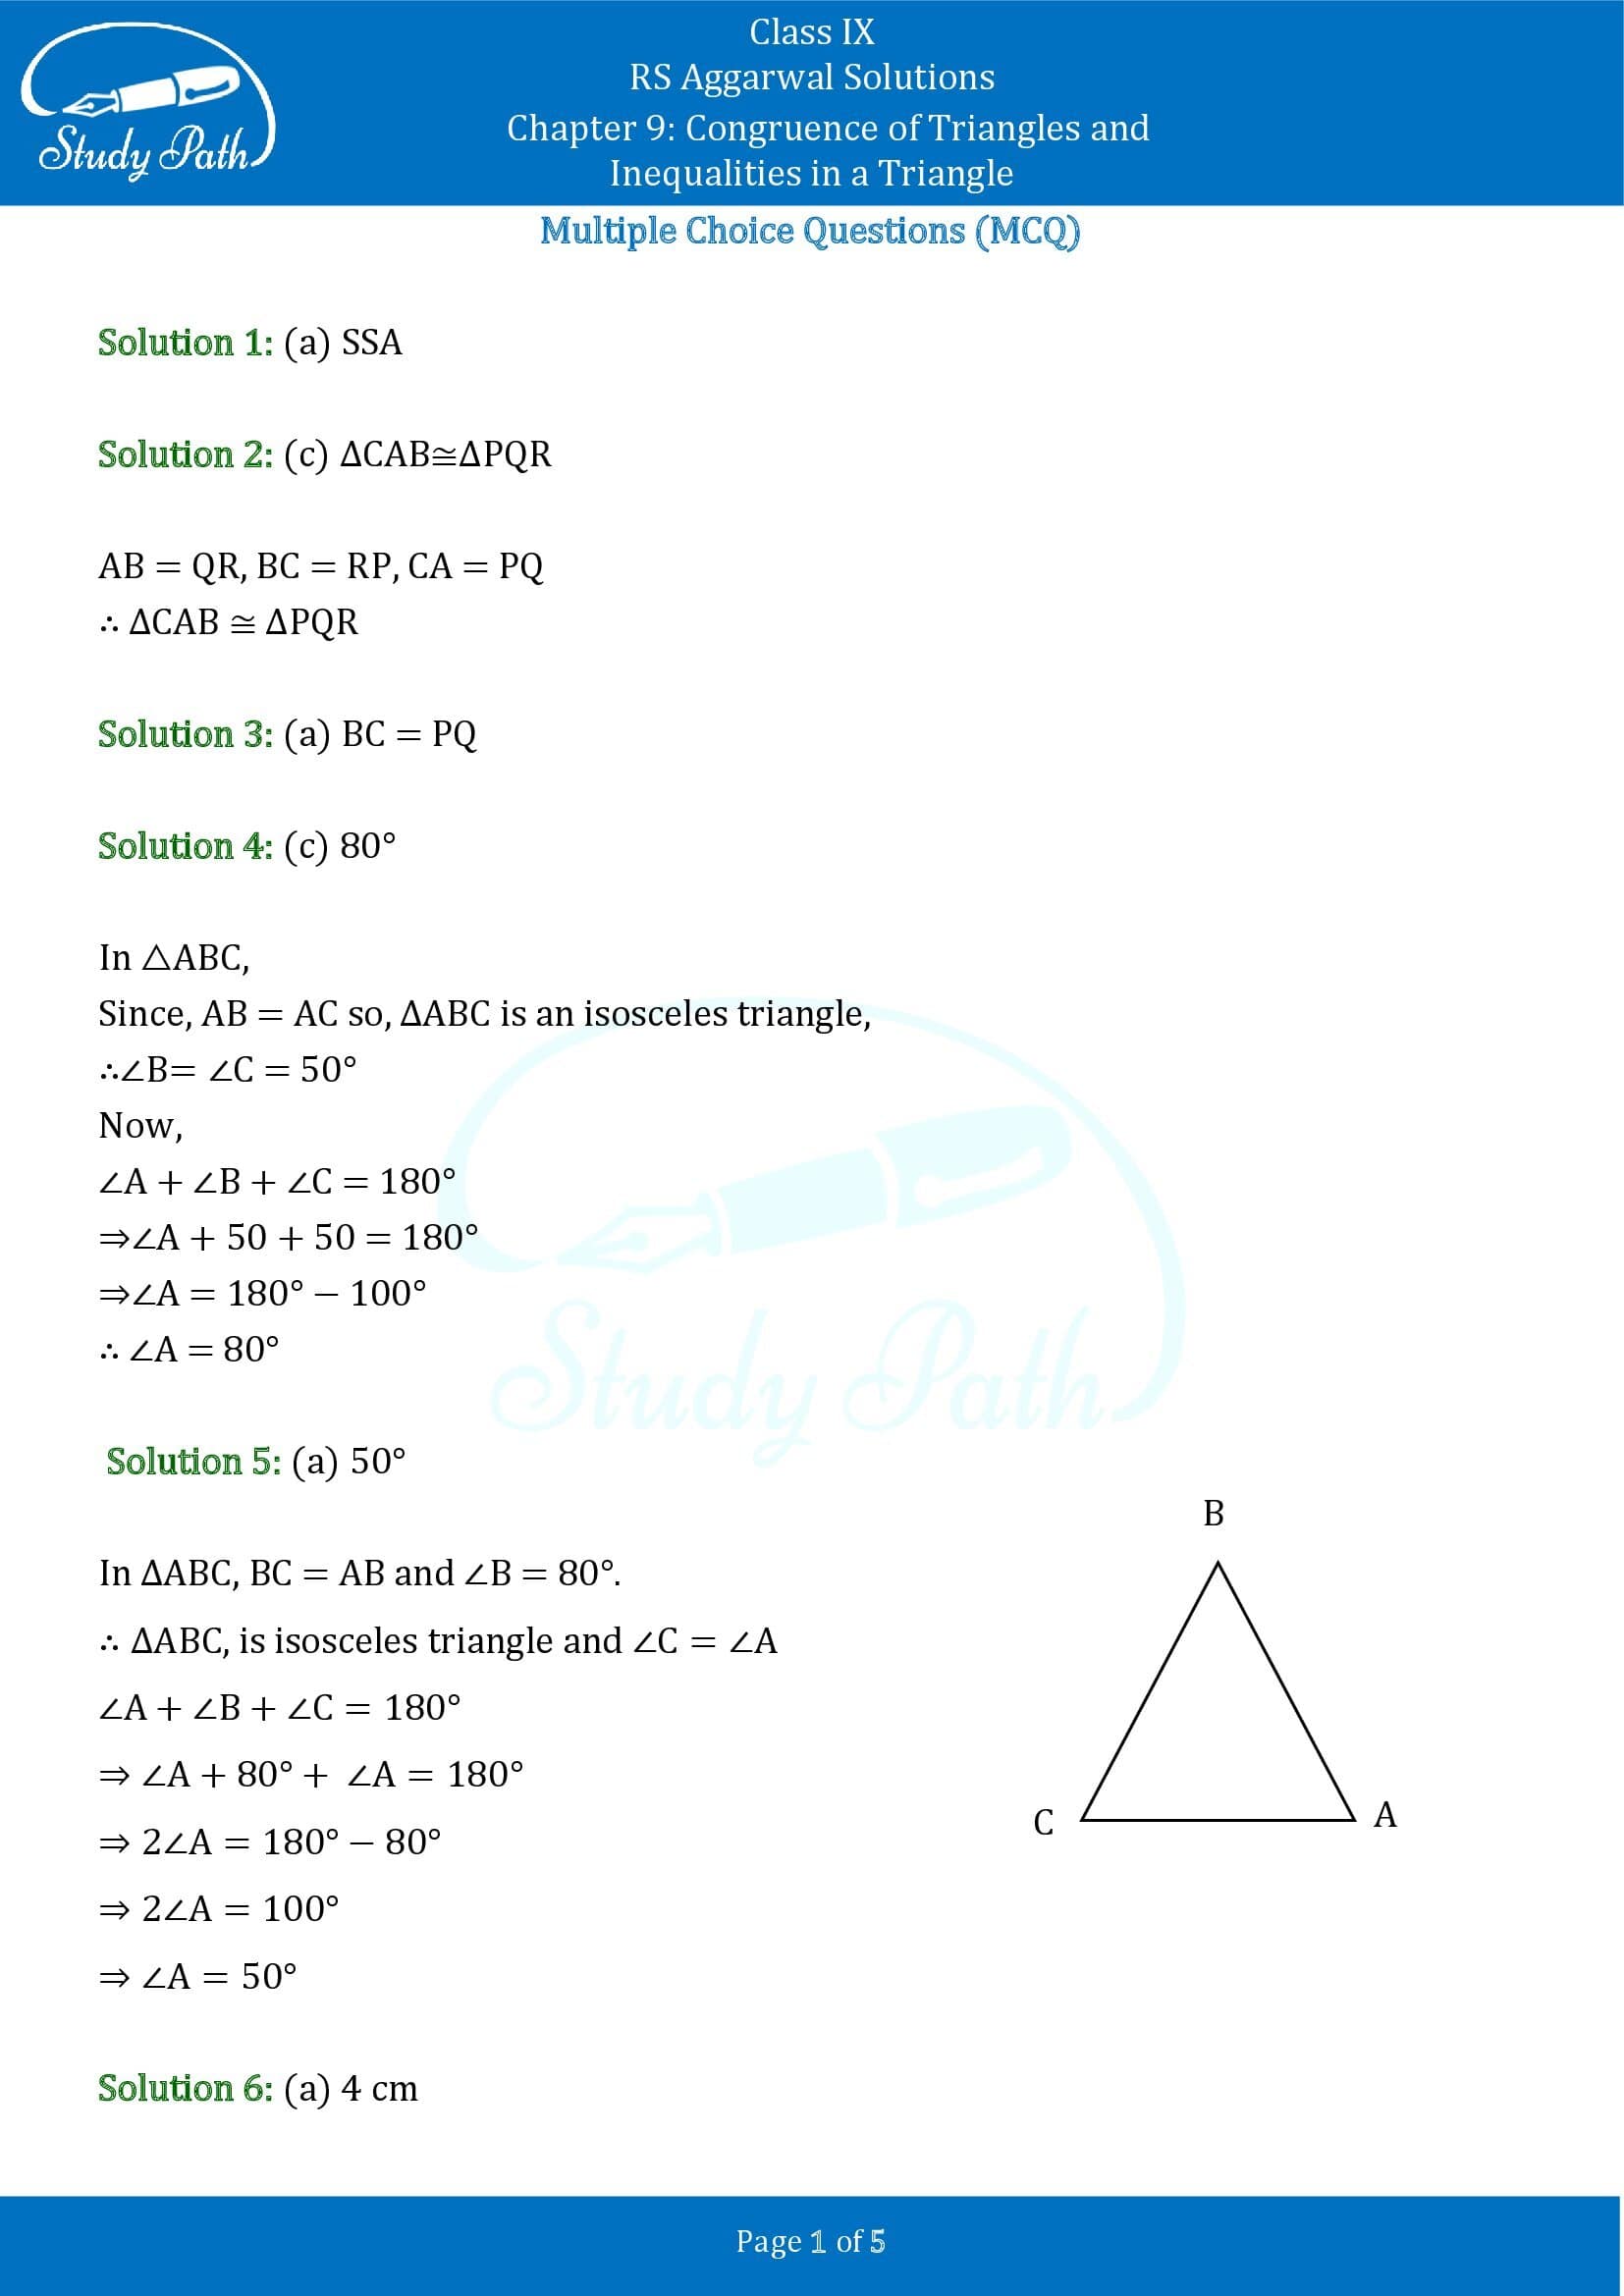 RS Aggarwal Solutions Class 9 Chapter 9 Congruence of Triangles and Inequalities in a Triangle Multiple Choice Questions MCQs 00001